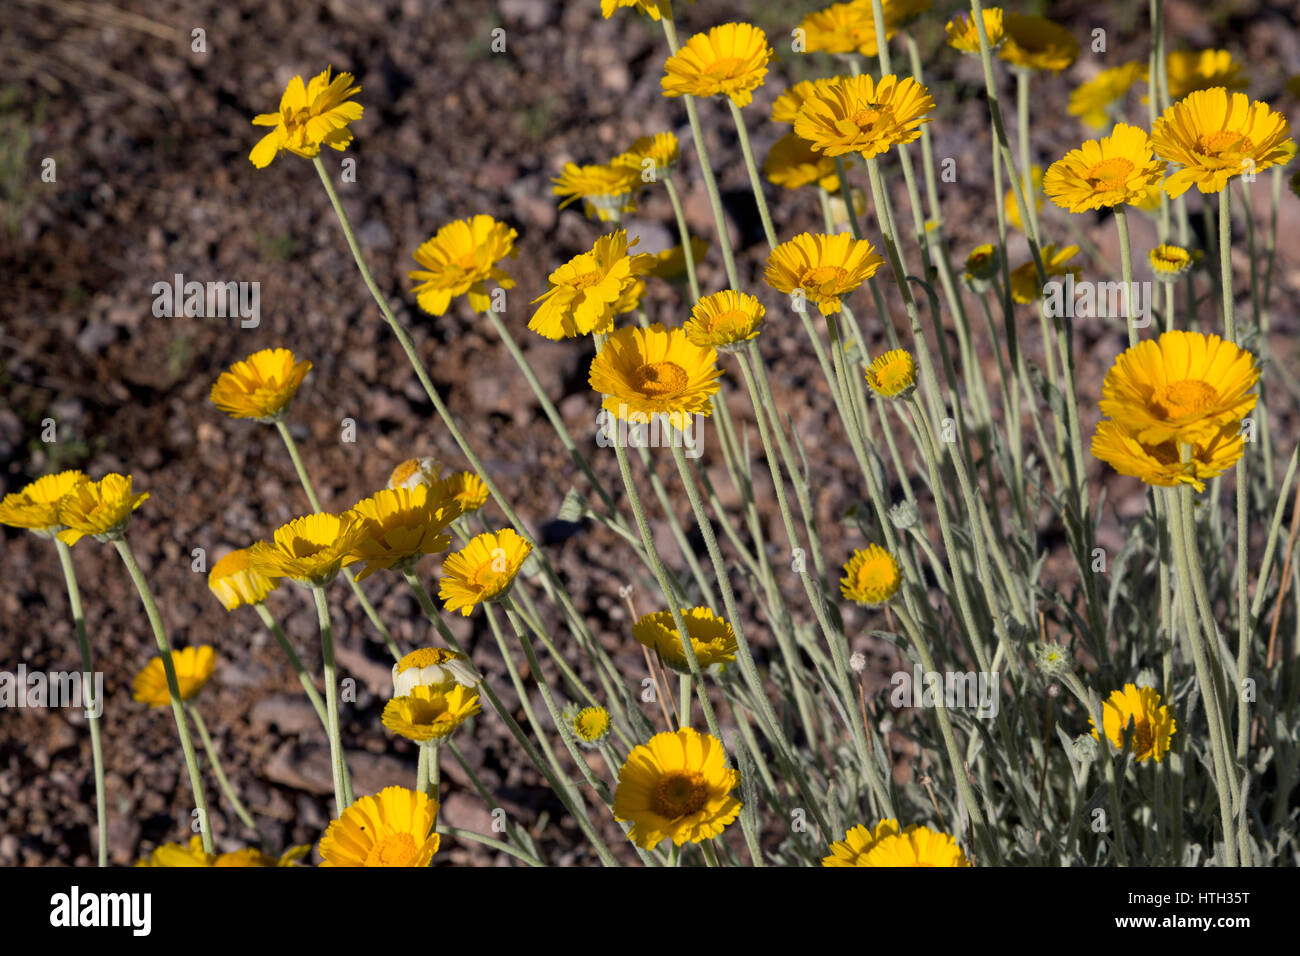 Desert marigold in Arizona, America's Southwest.  Location is Picacho Peak State Park on March 10, 2017. Spring wildflowers are a tourist attraction. Stock Photo